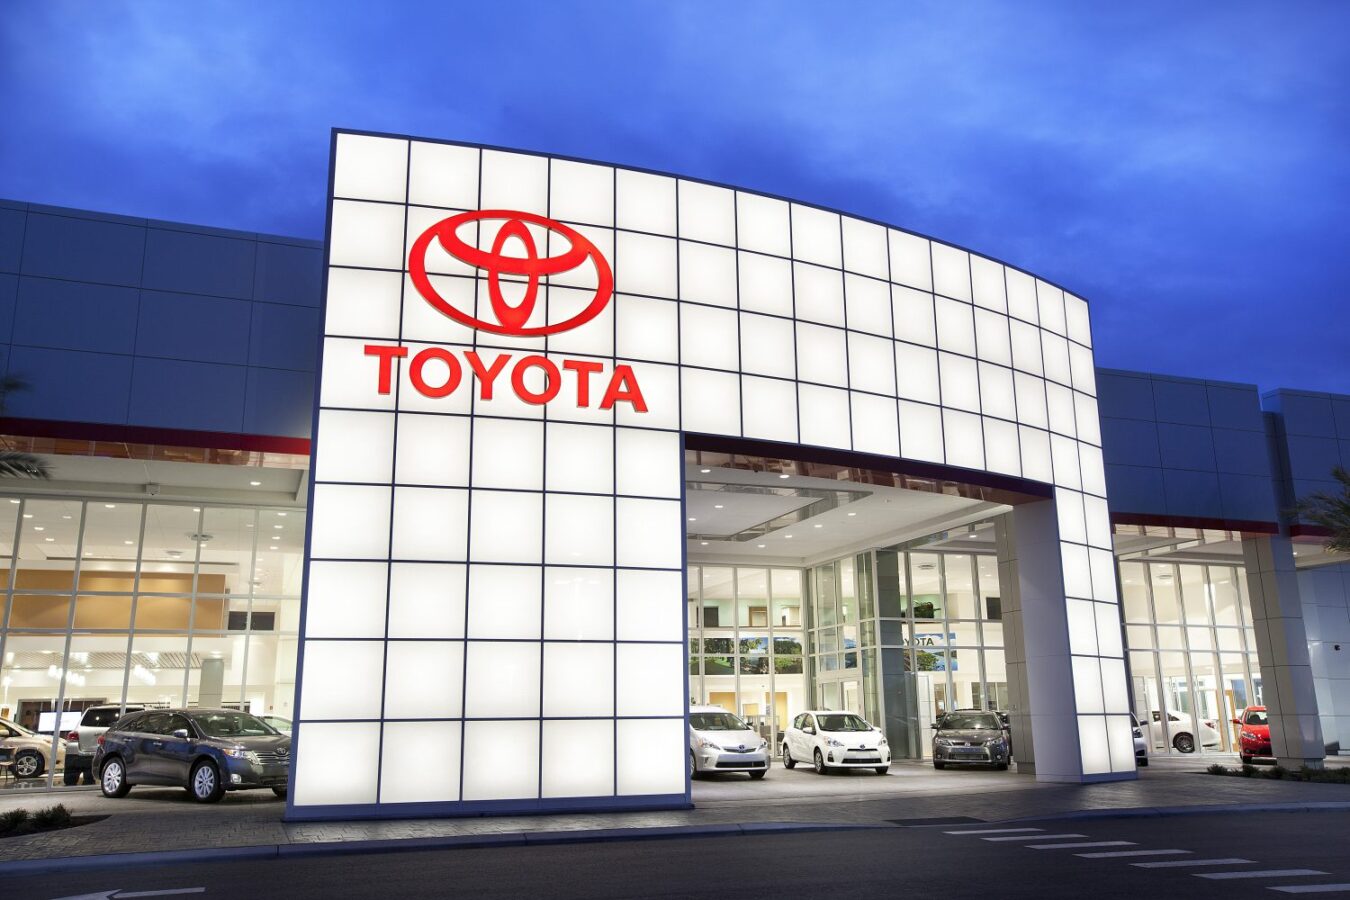 Cedar Park Toyota A Positive Review of Excellence and Reliability